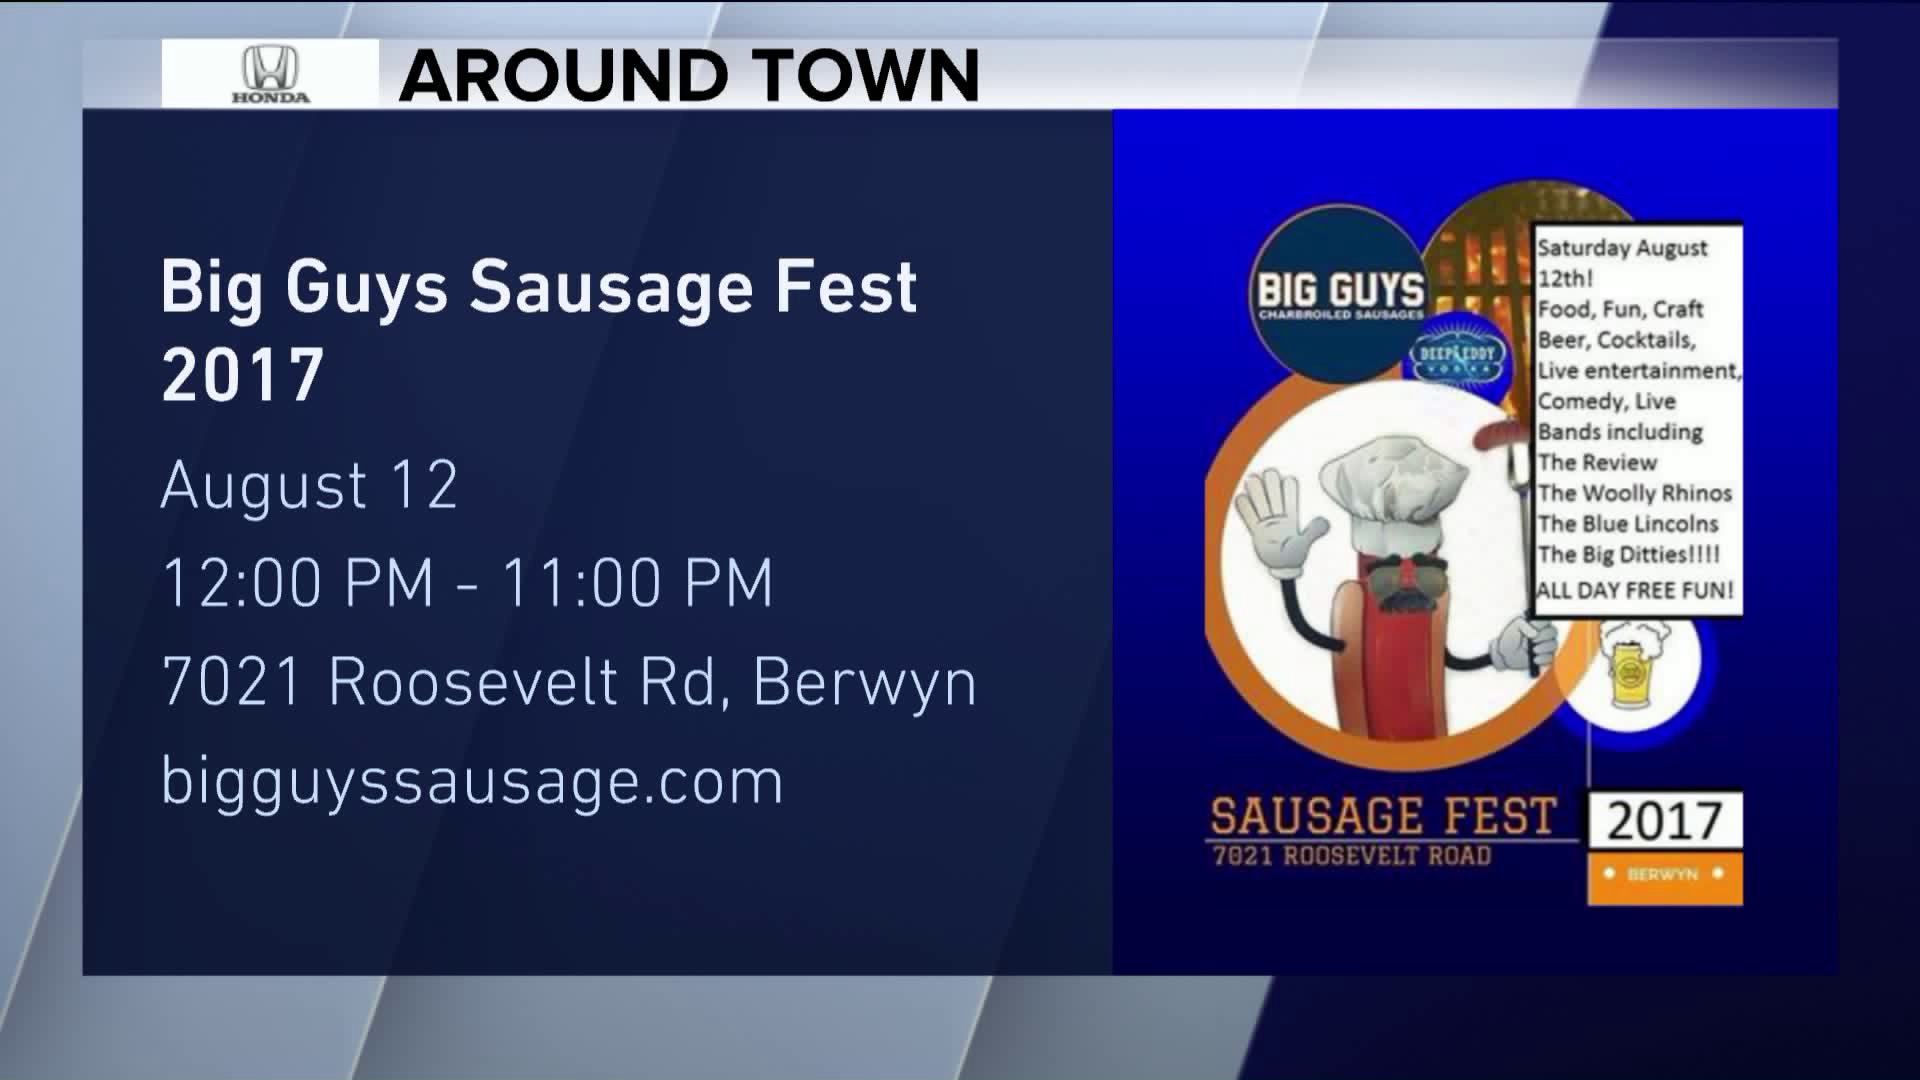 Around Town at the Sausage Fest